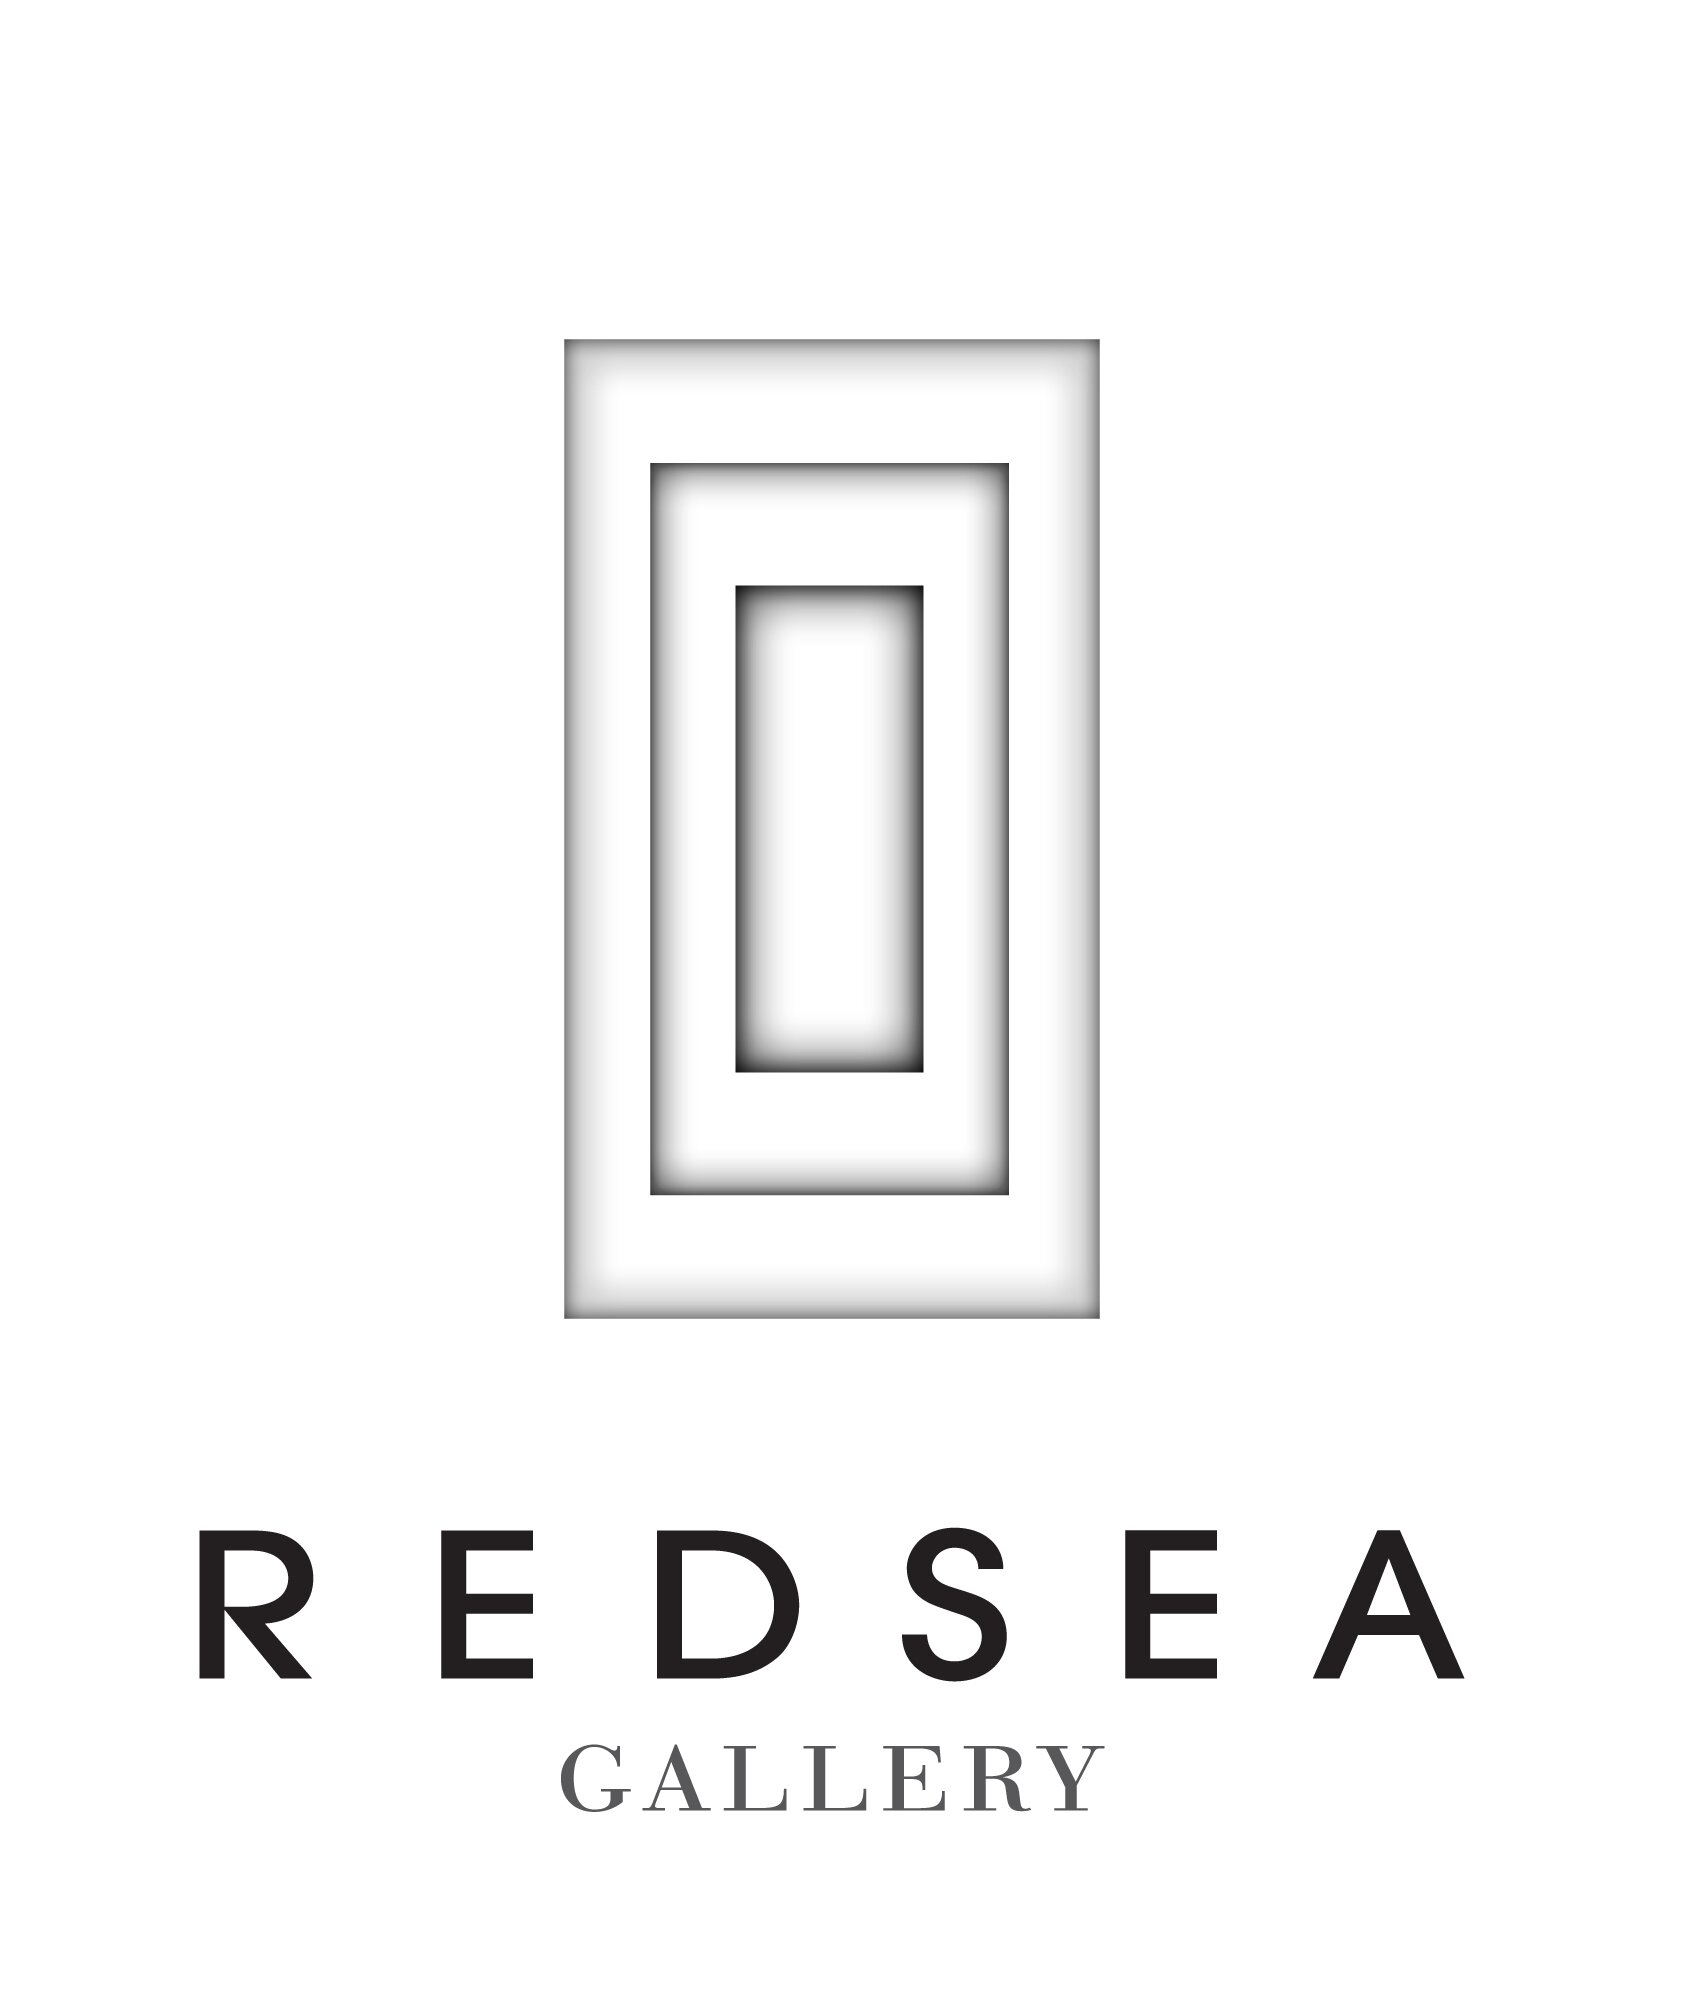 REDSEA Gallery inspires visitors to discover Australian and International Contemporary Art.